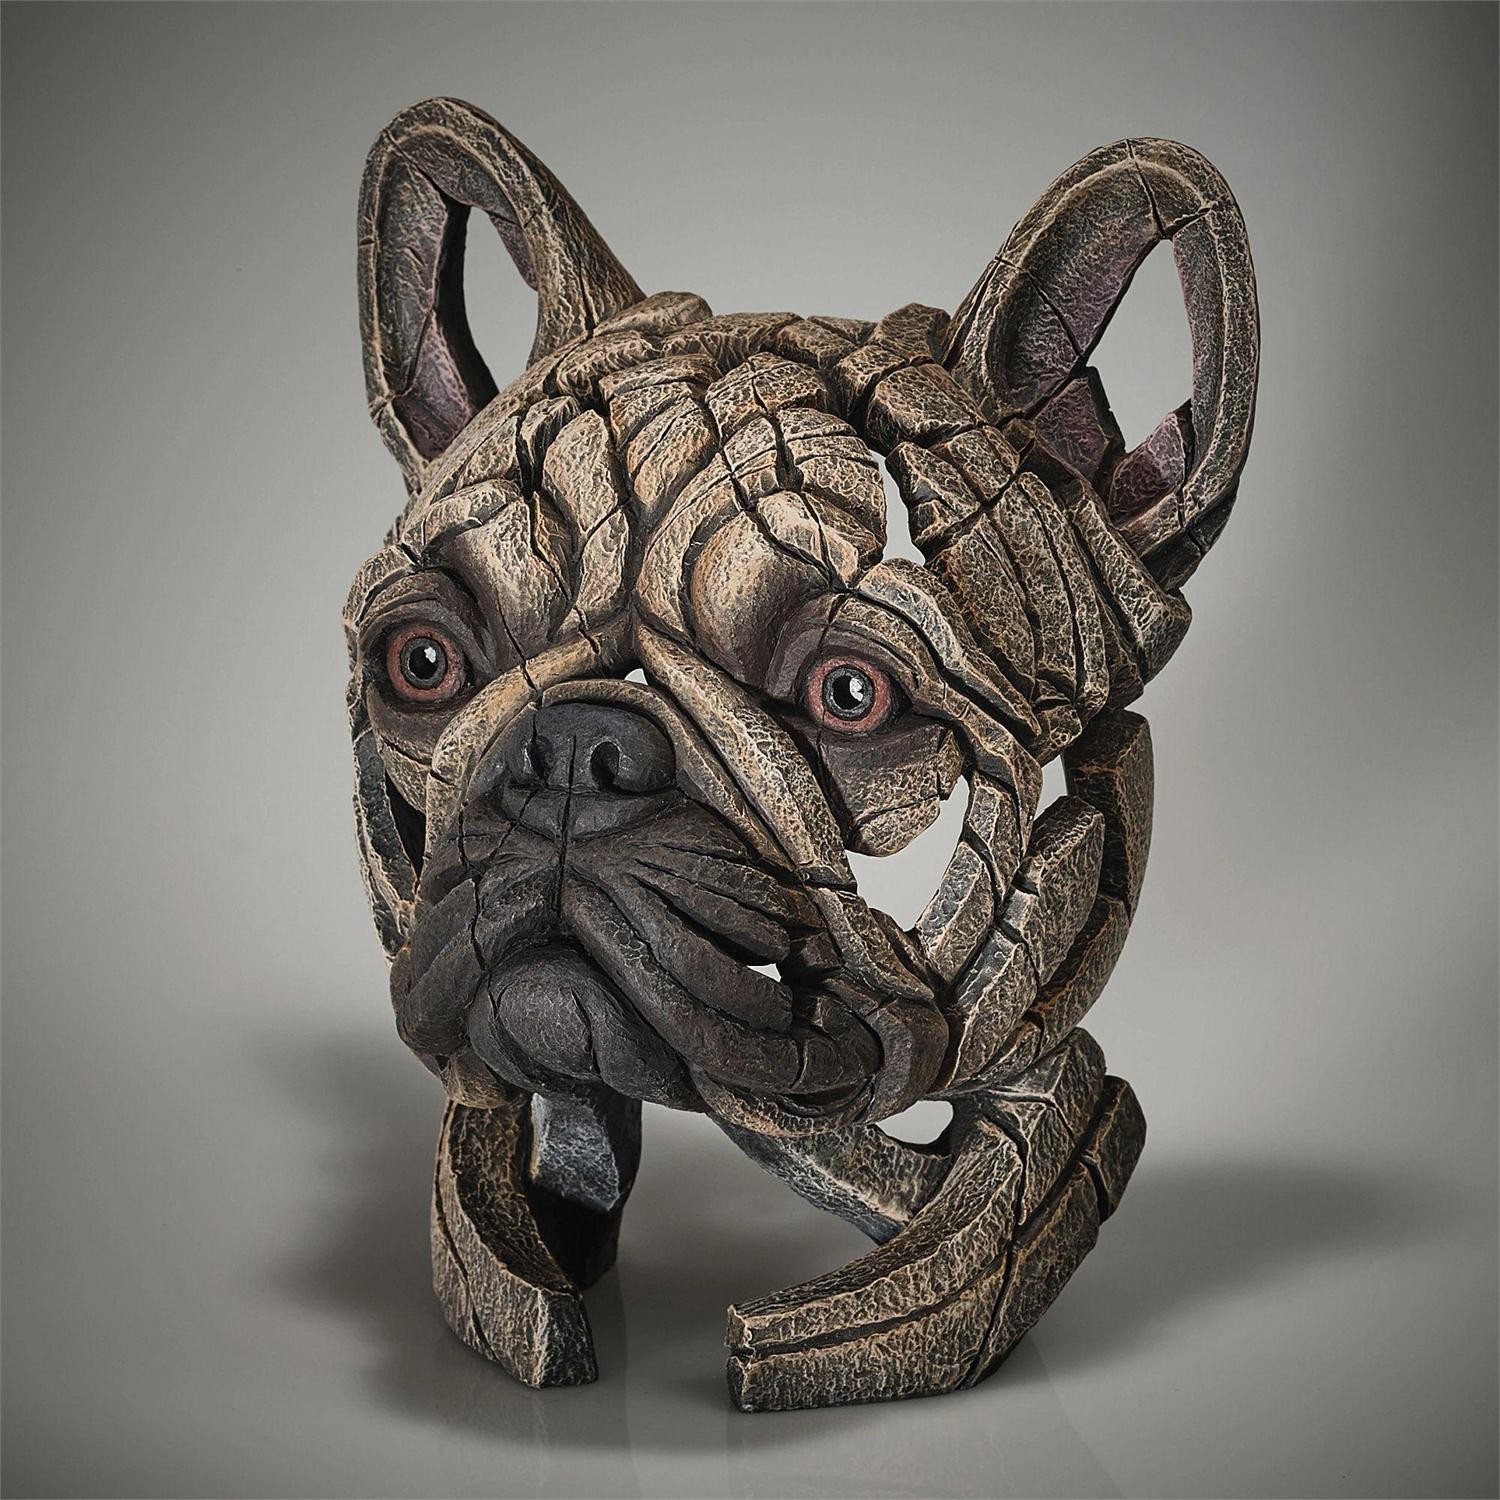 Enesco Gifts Artist Matt Buckley The Edge Sculpture French Bulldog Bust Free Shipping Ivey's Gifts And Decor